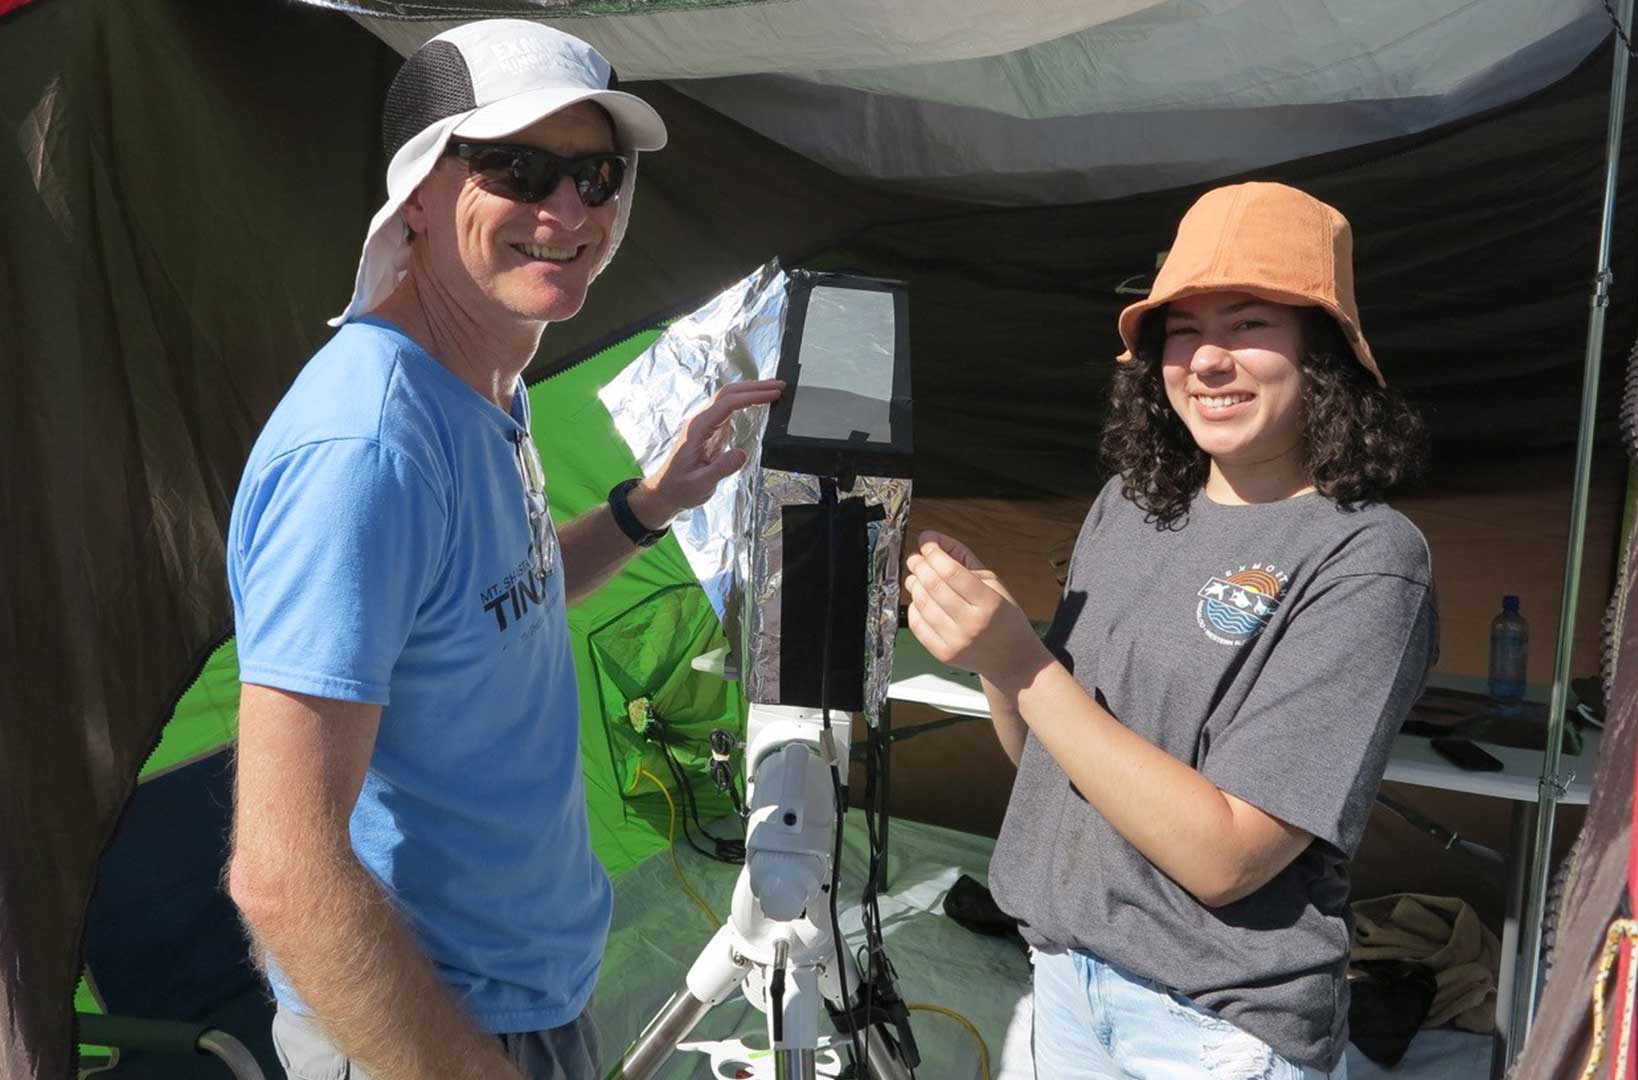 Eric Ayars (left) and Danielle Casillas are standing beside a spectrometer, which they will use to gather data during a solar eclipse.  